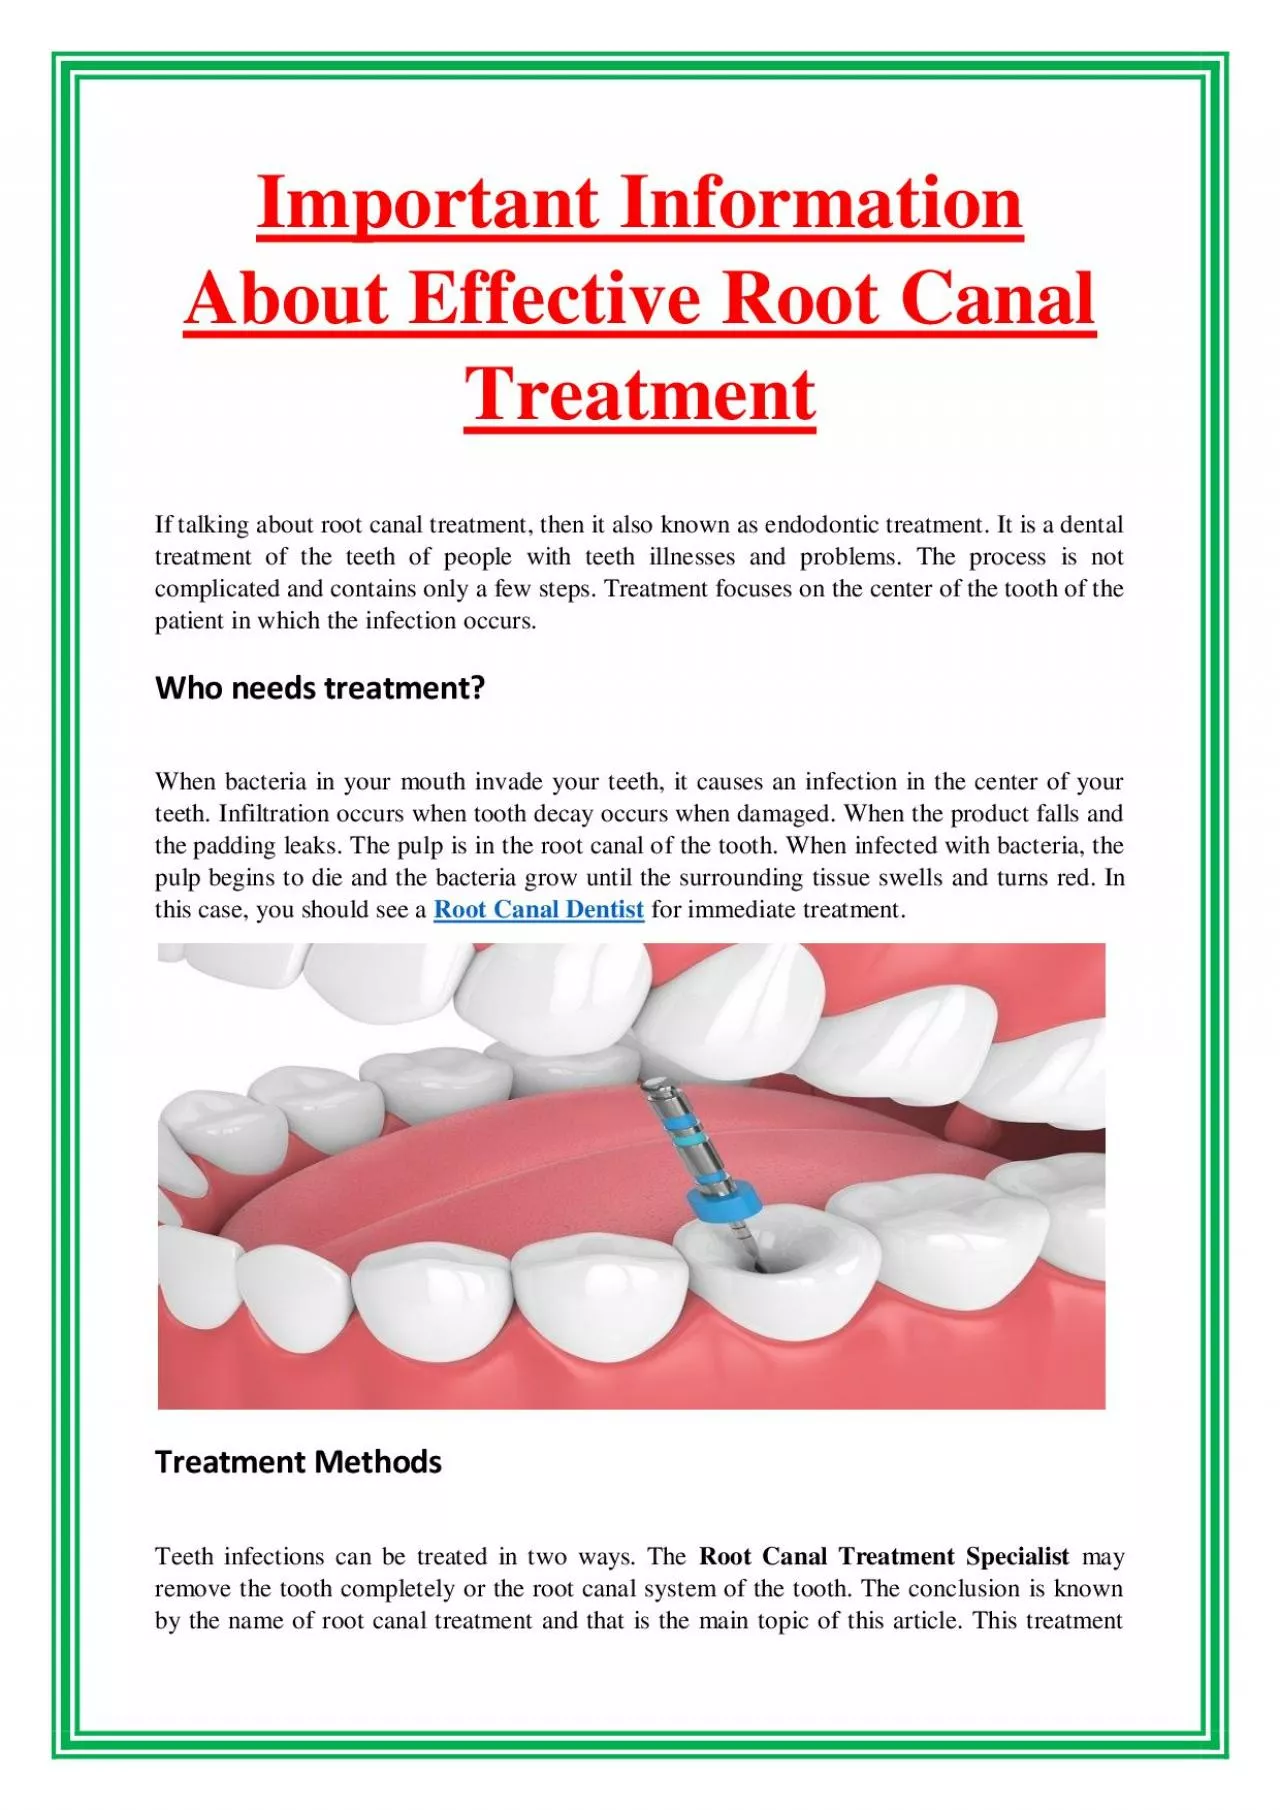 Important Information About Effective Root Canal Treatment